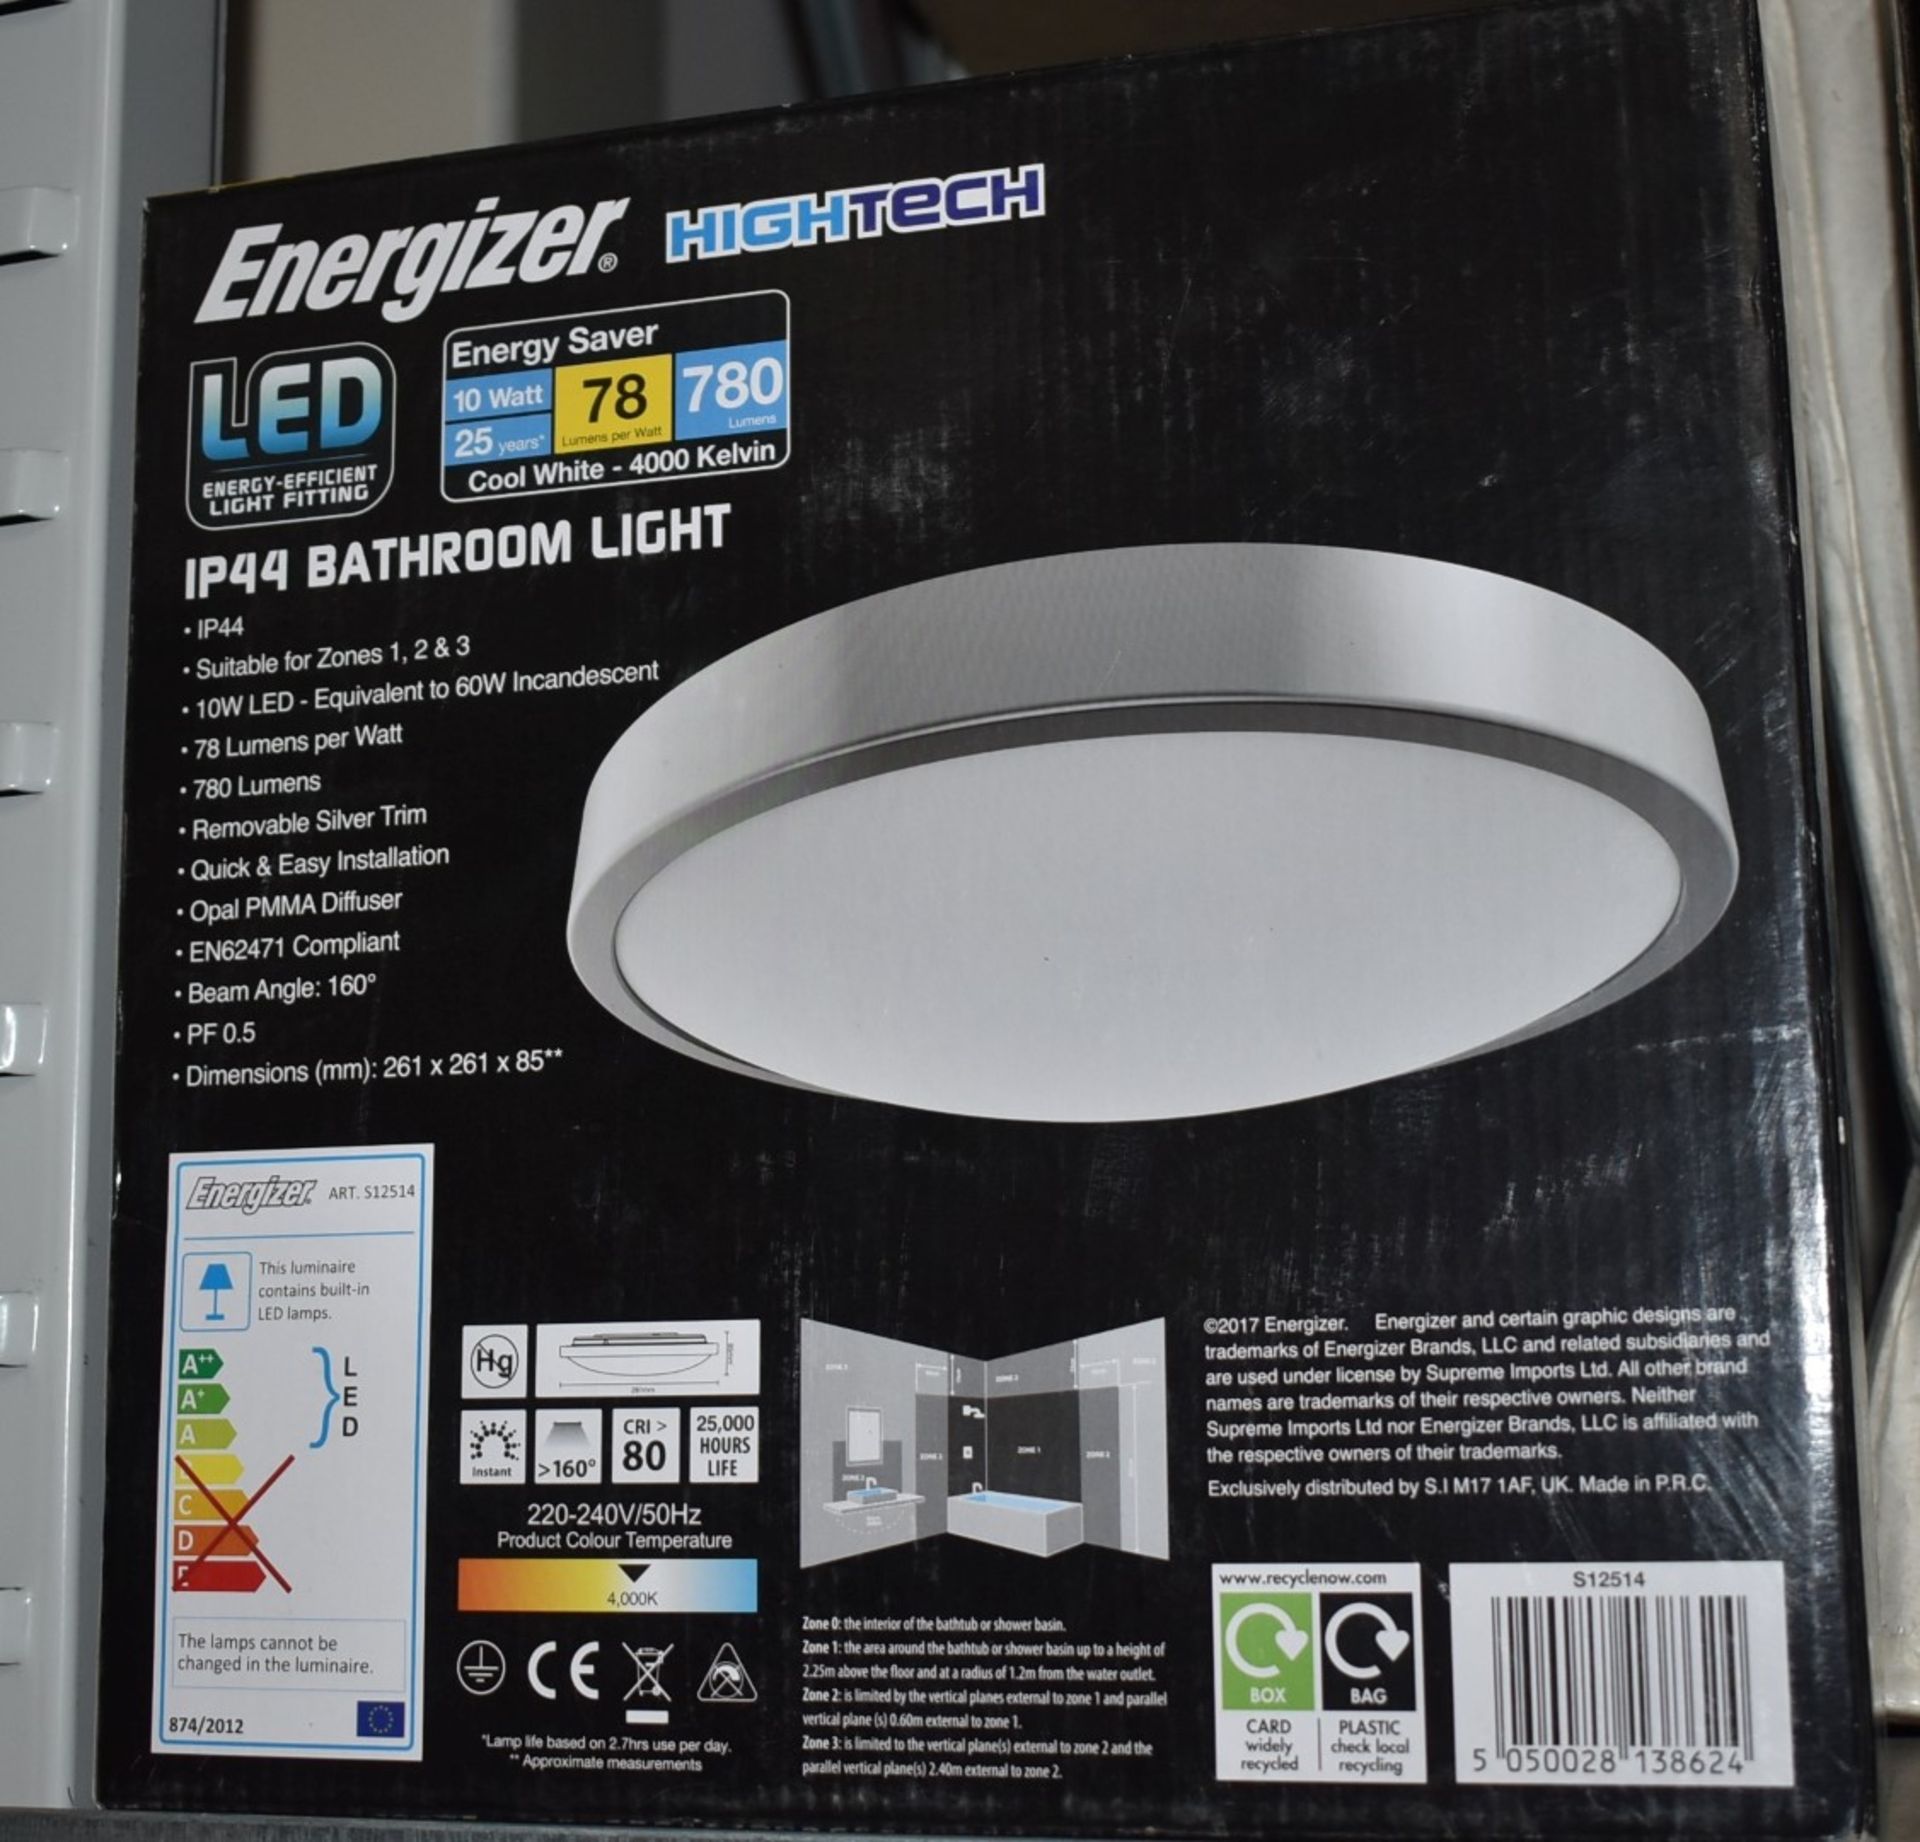 1 x Energizer 10w LED Bathroom Light - IP44 Rated - 4000k Cool White - Silver Finish With Opal - Image 3 of 5